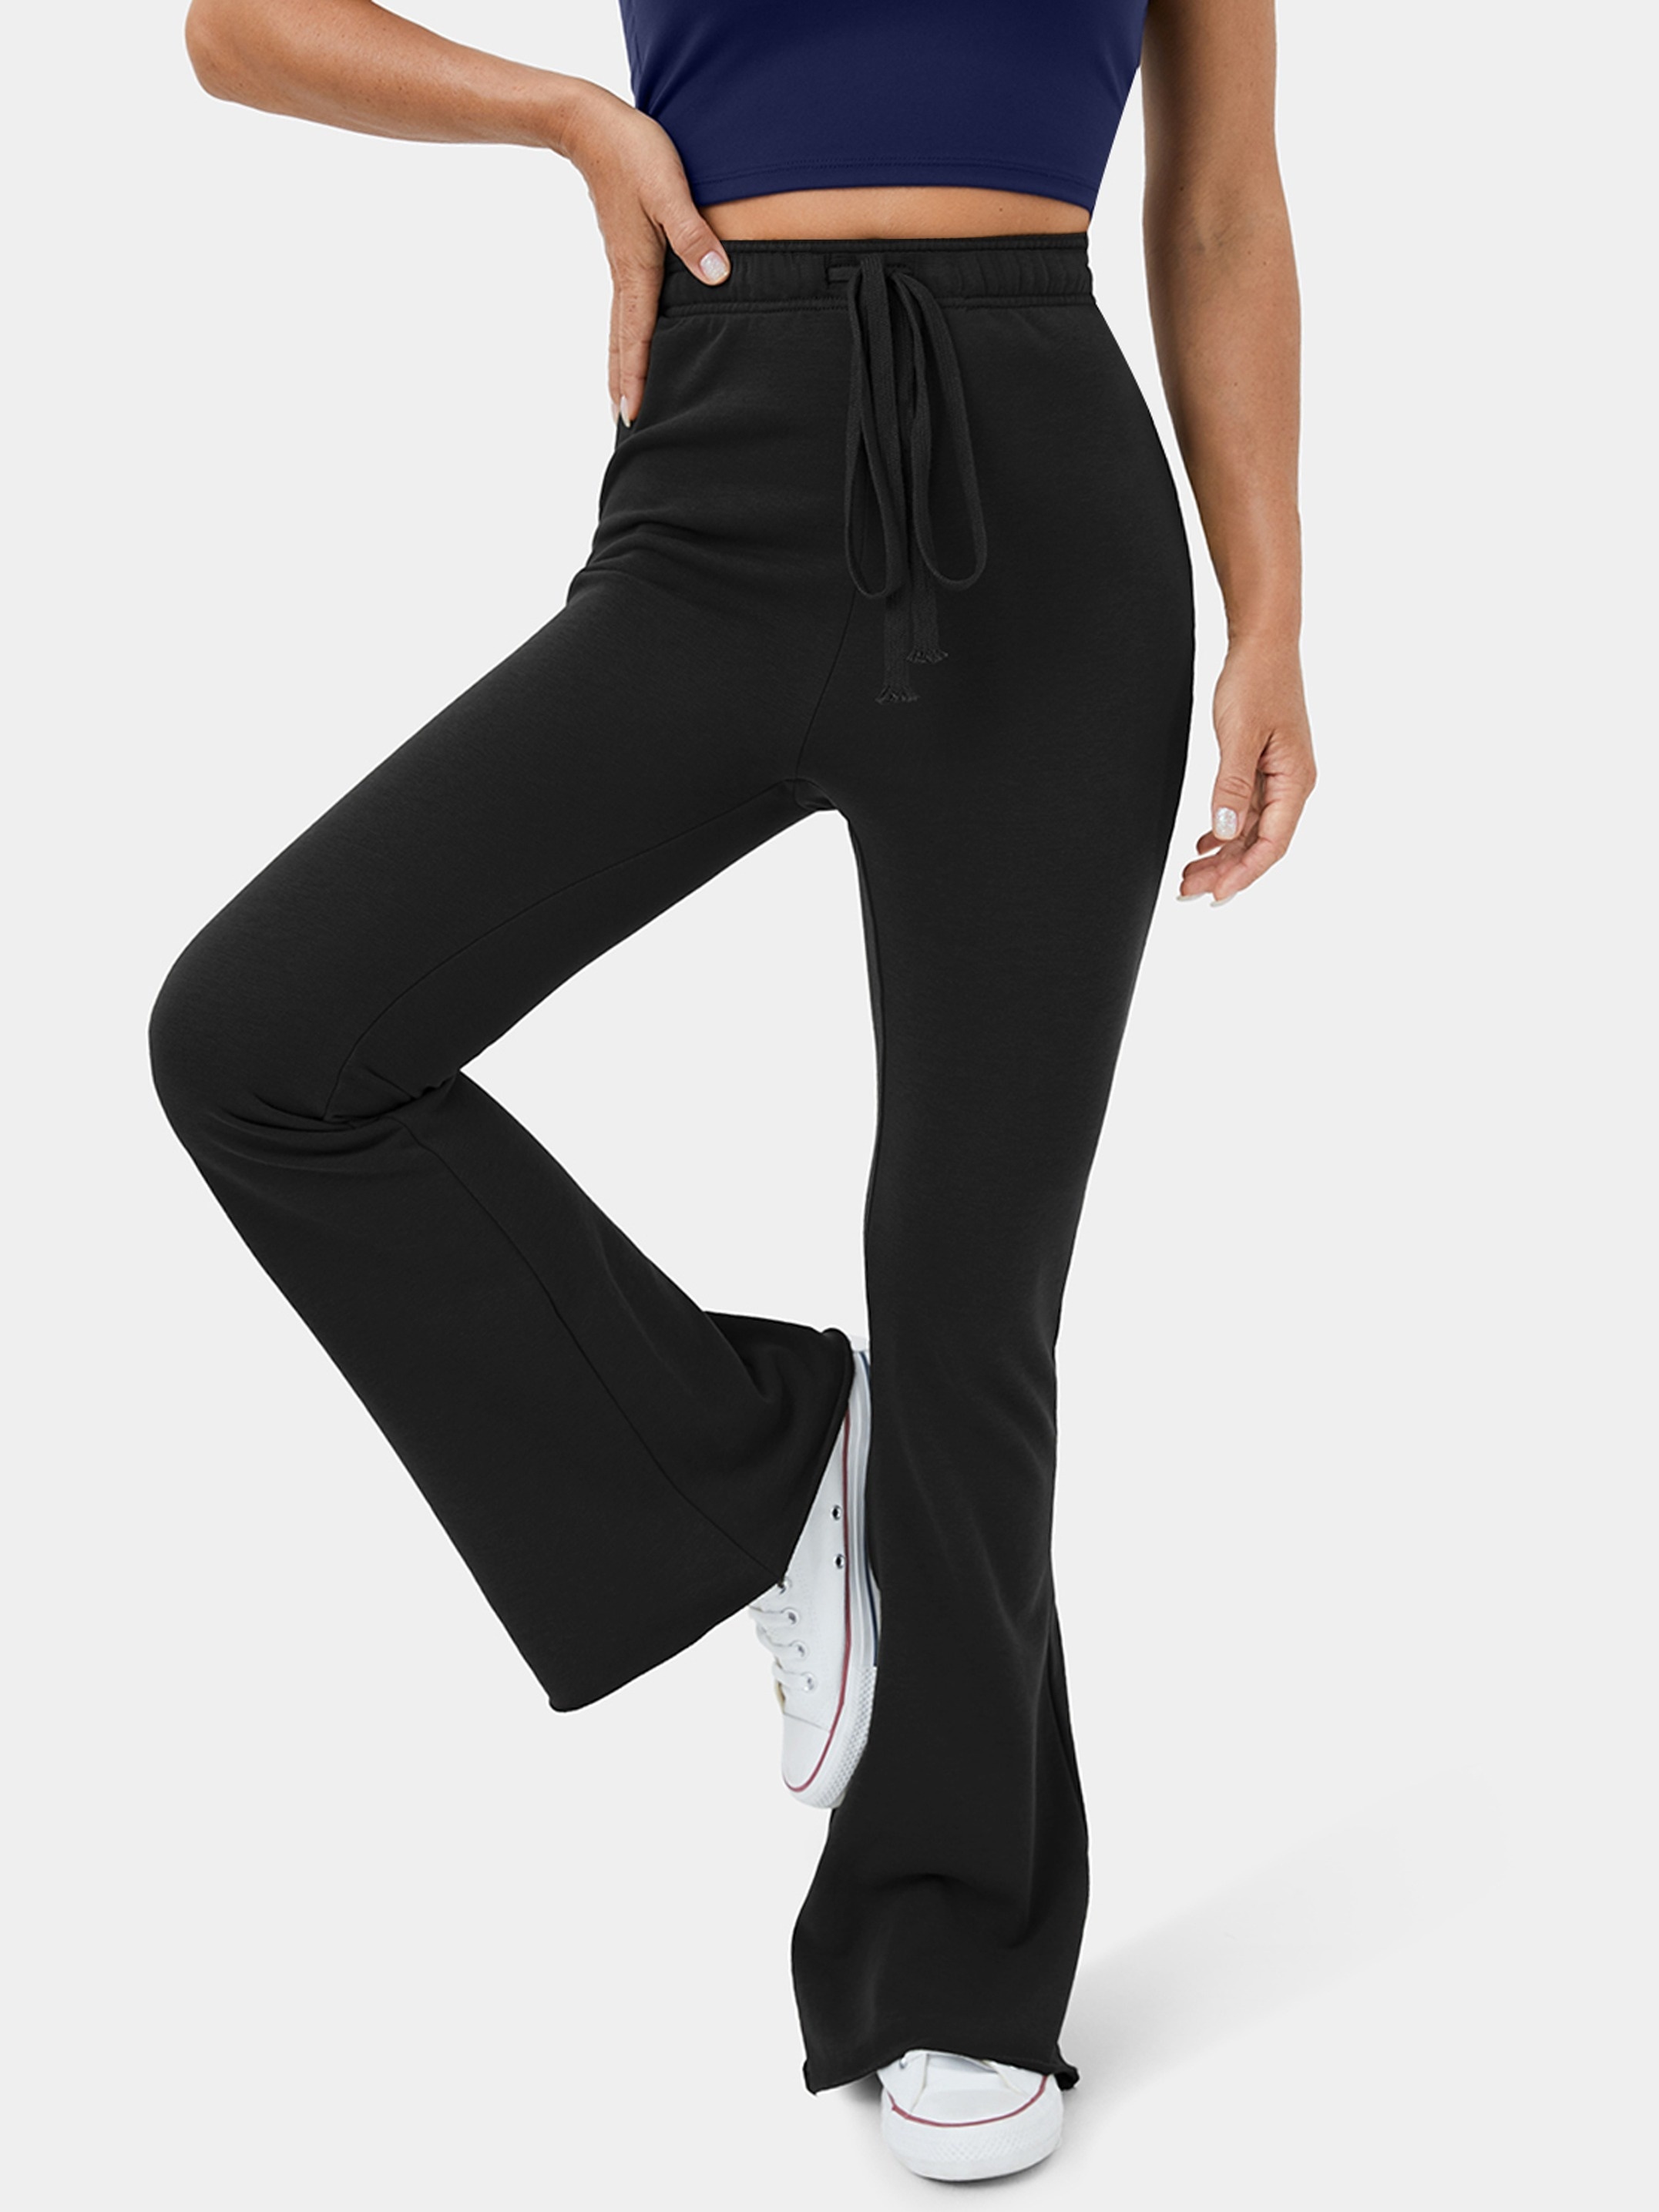 Buy Femea Women Slim Fit Flared Track Pants with Side Taping